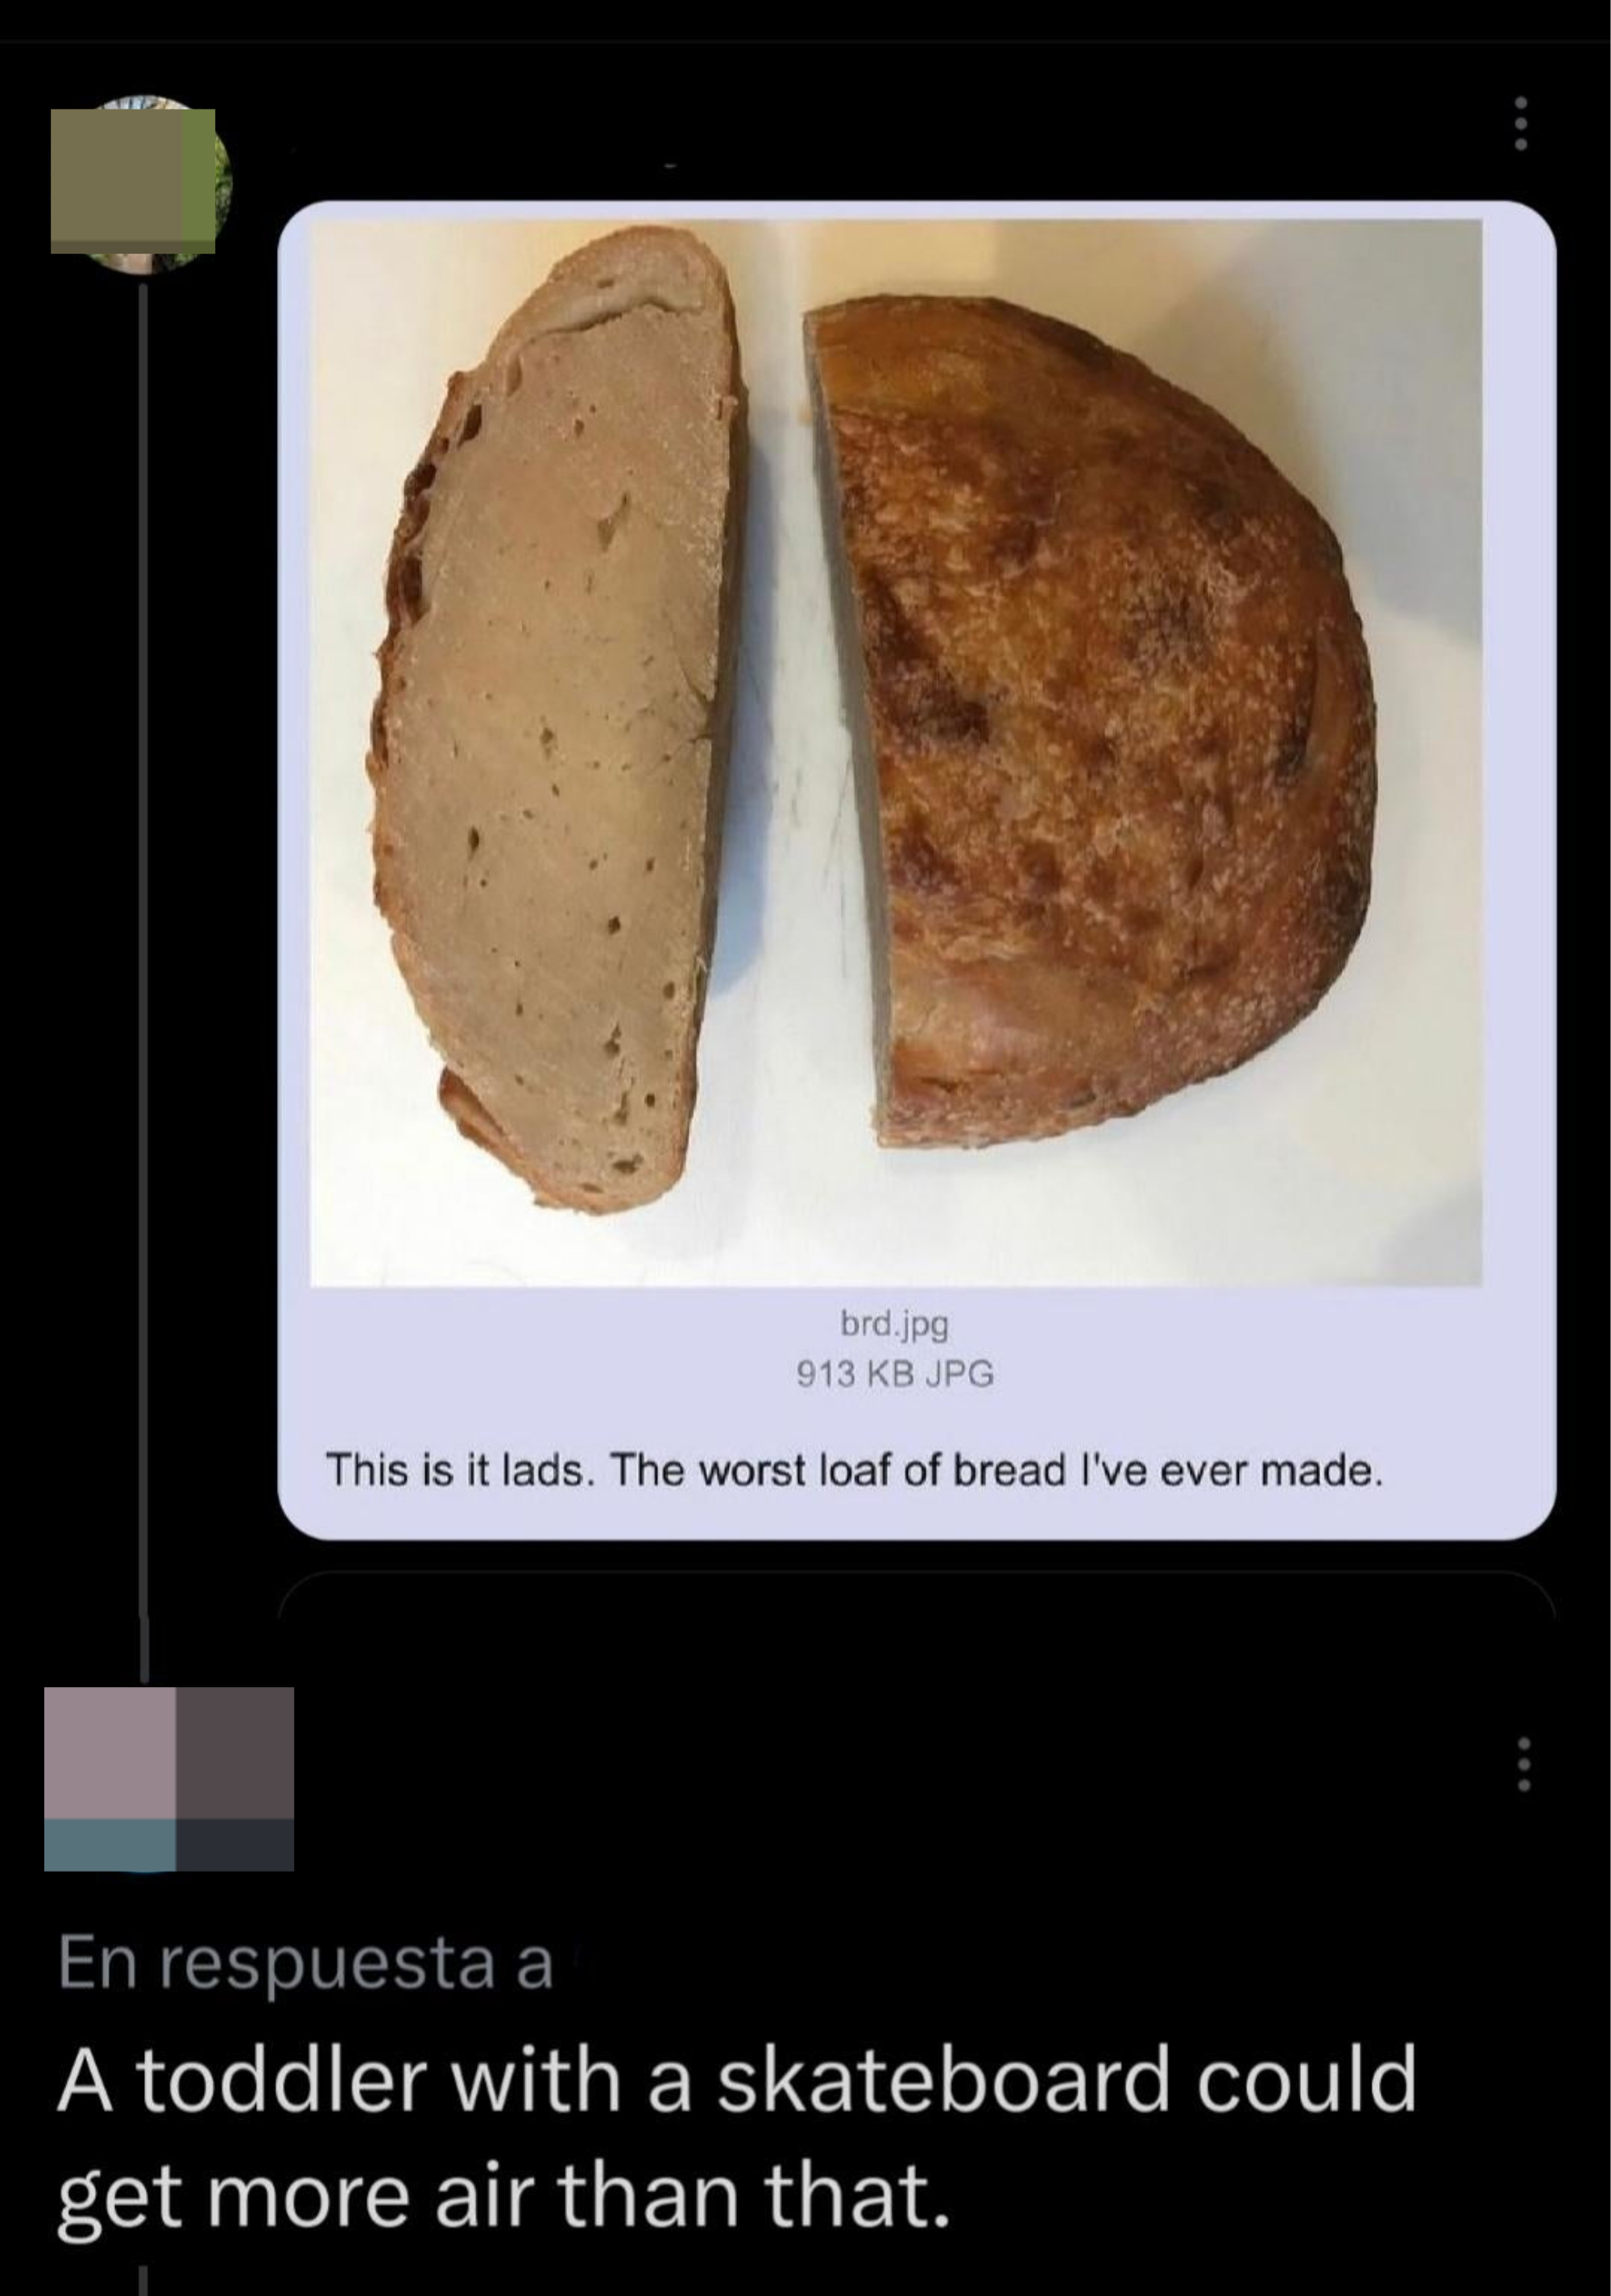 Person posts a photo of a loaf of baked bread that looks extremely dense, saying &quot;This is it lads, the worst loaf of bread I&#x27;ve ever made,&quot; with comment, &quot;A toddler with a skateboard could get more air than that&quot;